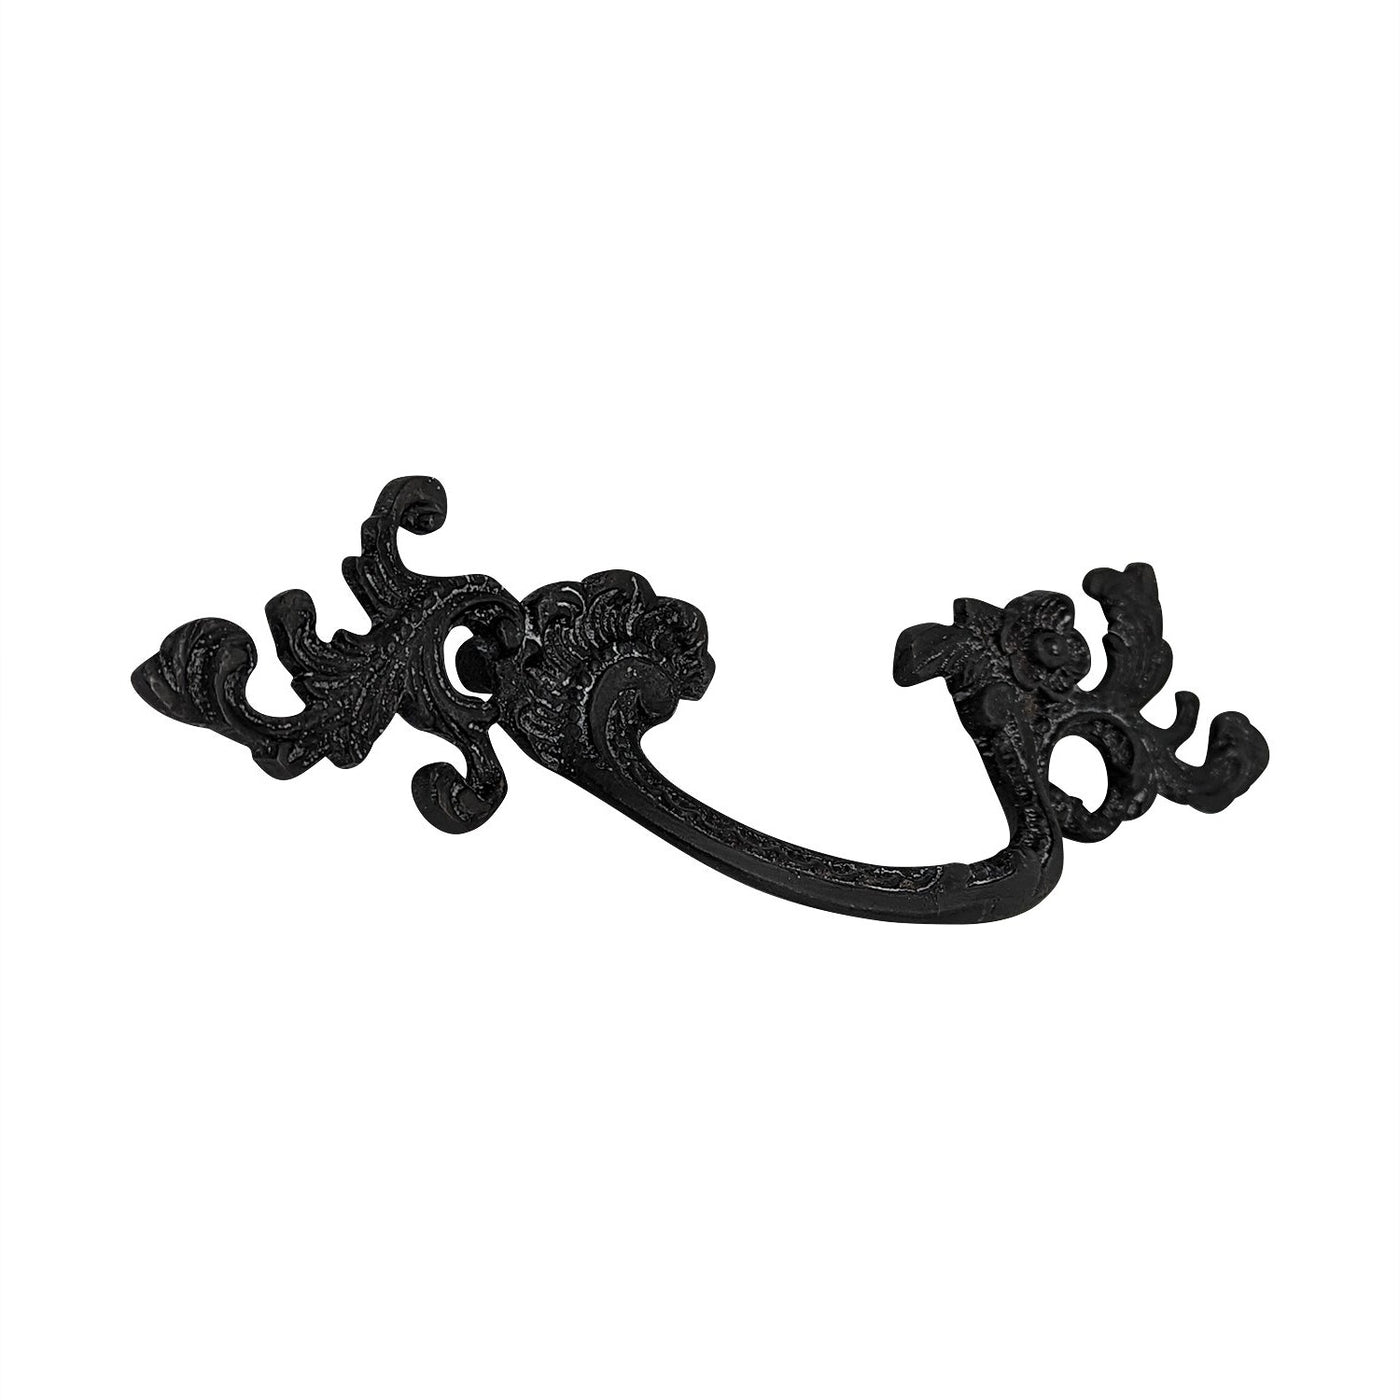 6 1/2 Inch (3.125" c-c) Filigree Rococo Pull (Several Finishes Available)